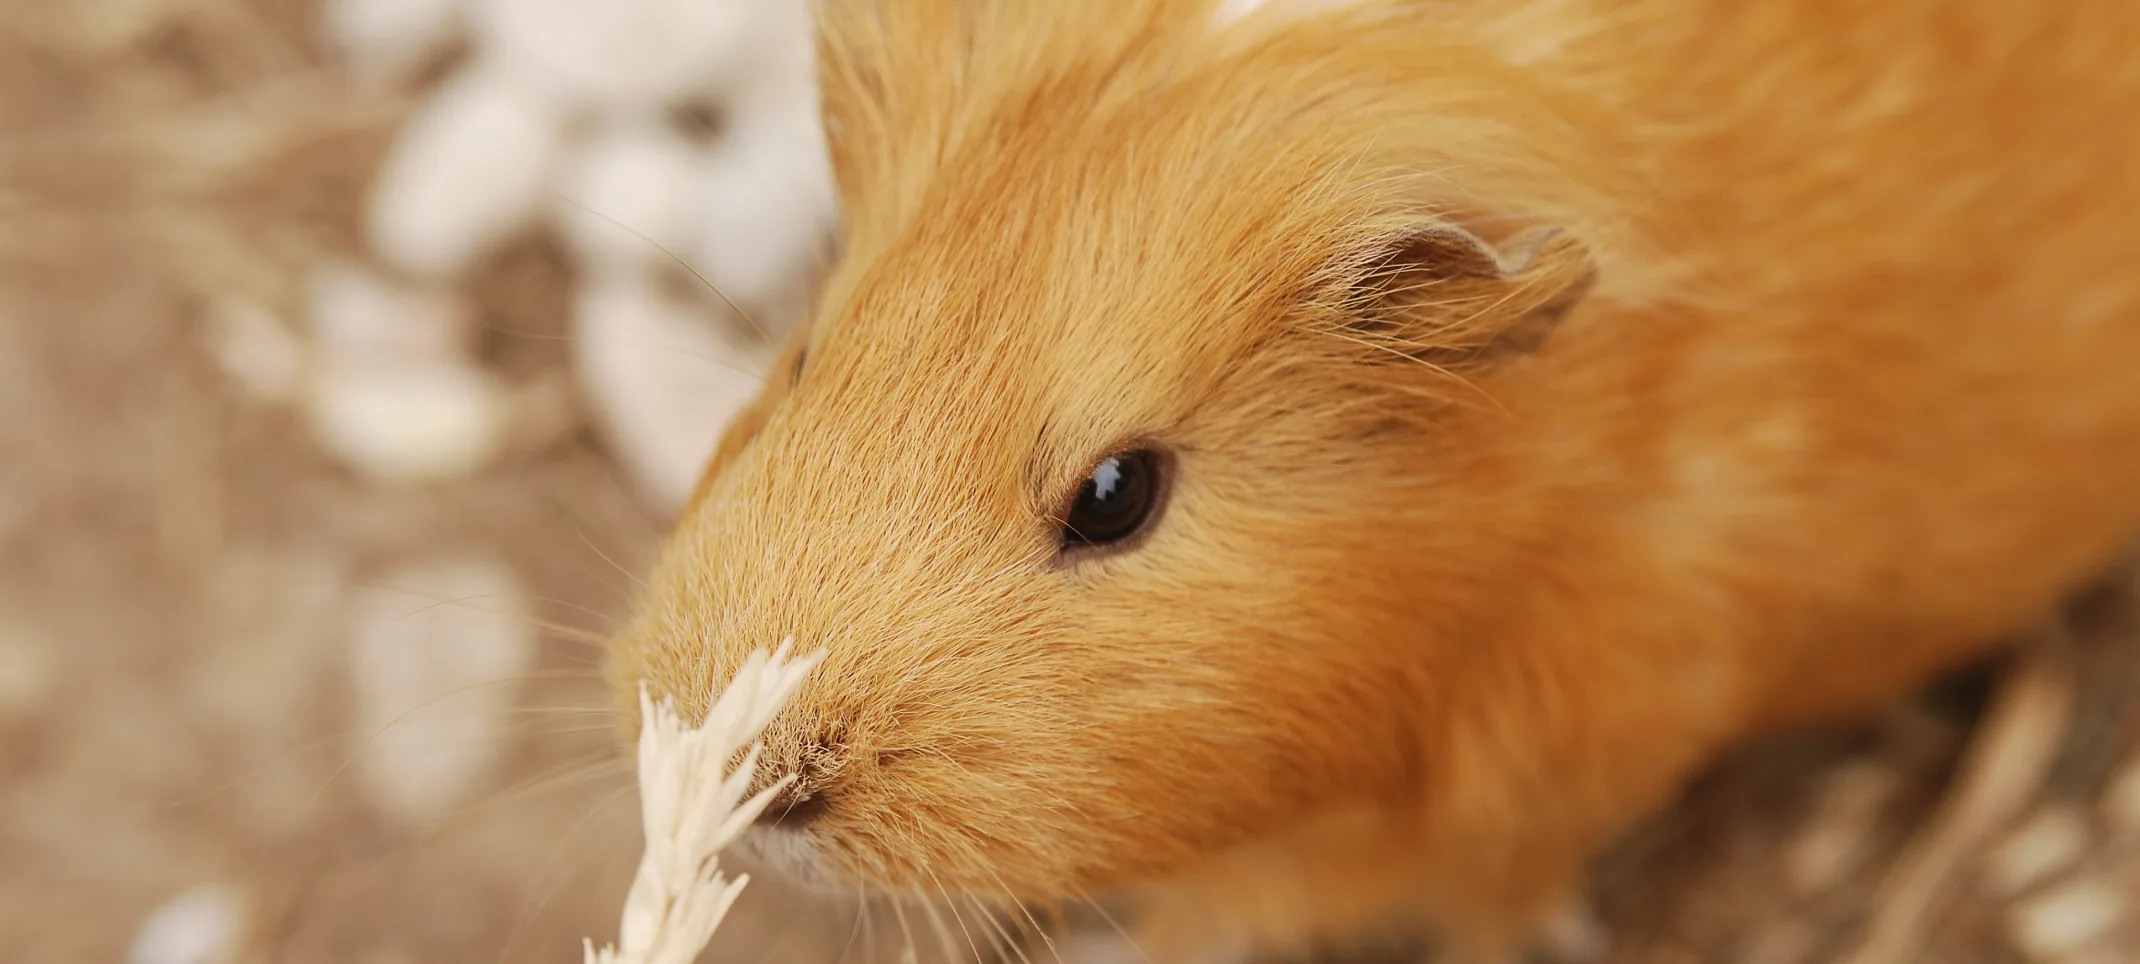 Guinea pig nibbling on wheat